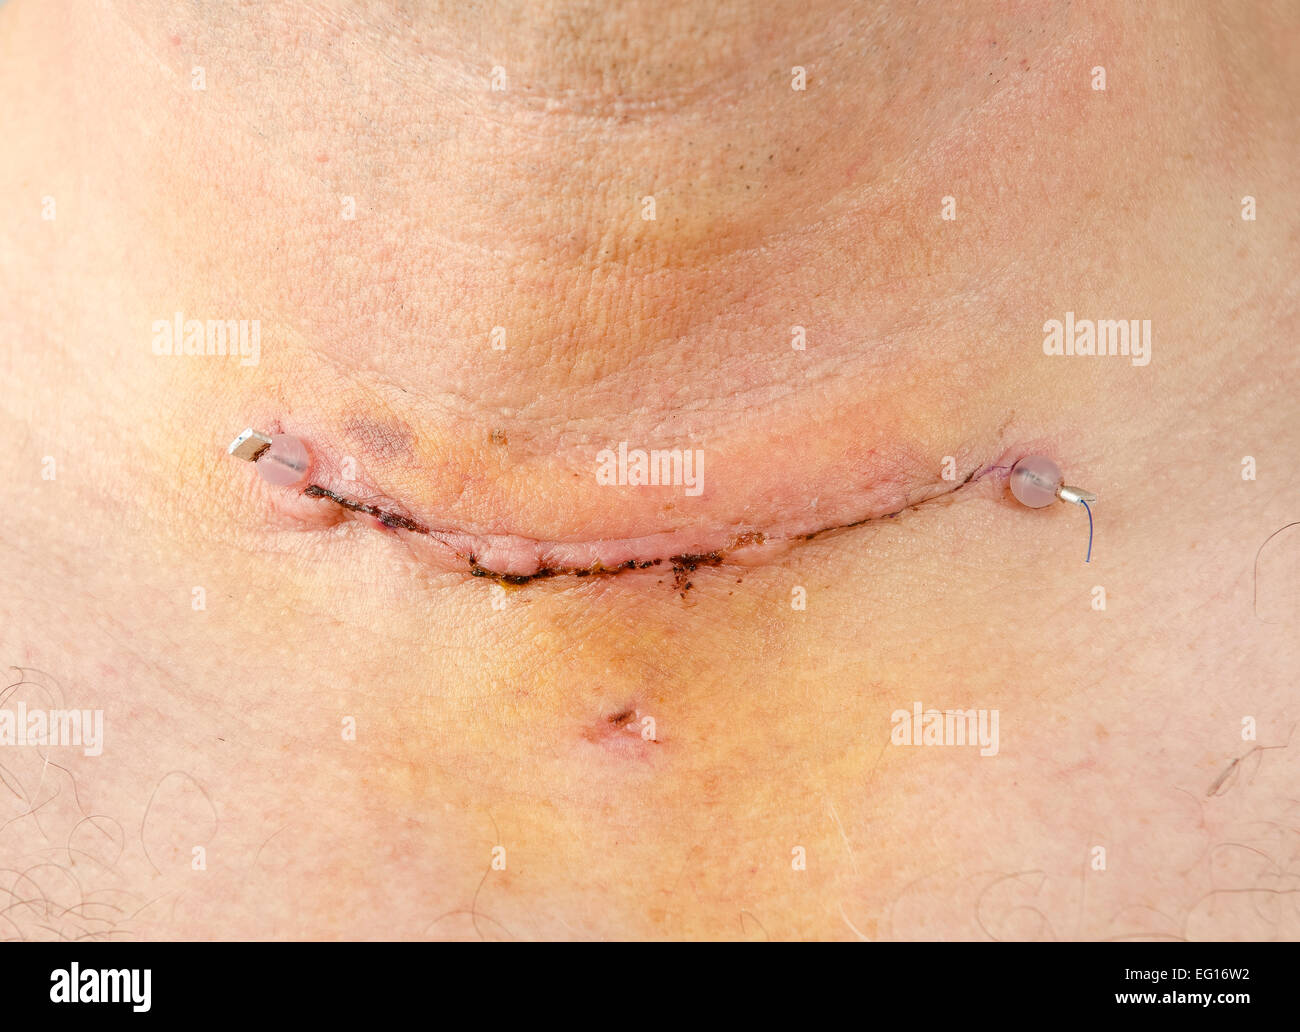 post operative scar wound and stitch of thyroidectomy also showing where drain was inserted release available for certain uses Stock Photo